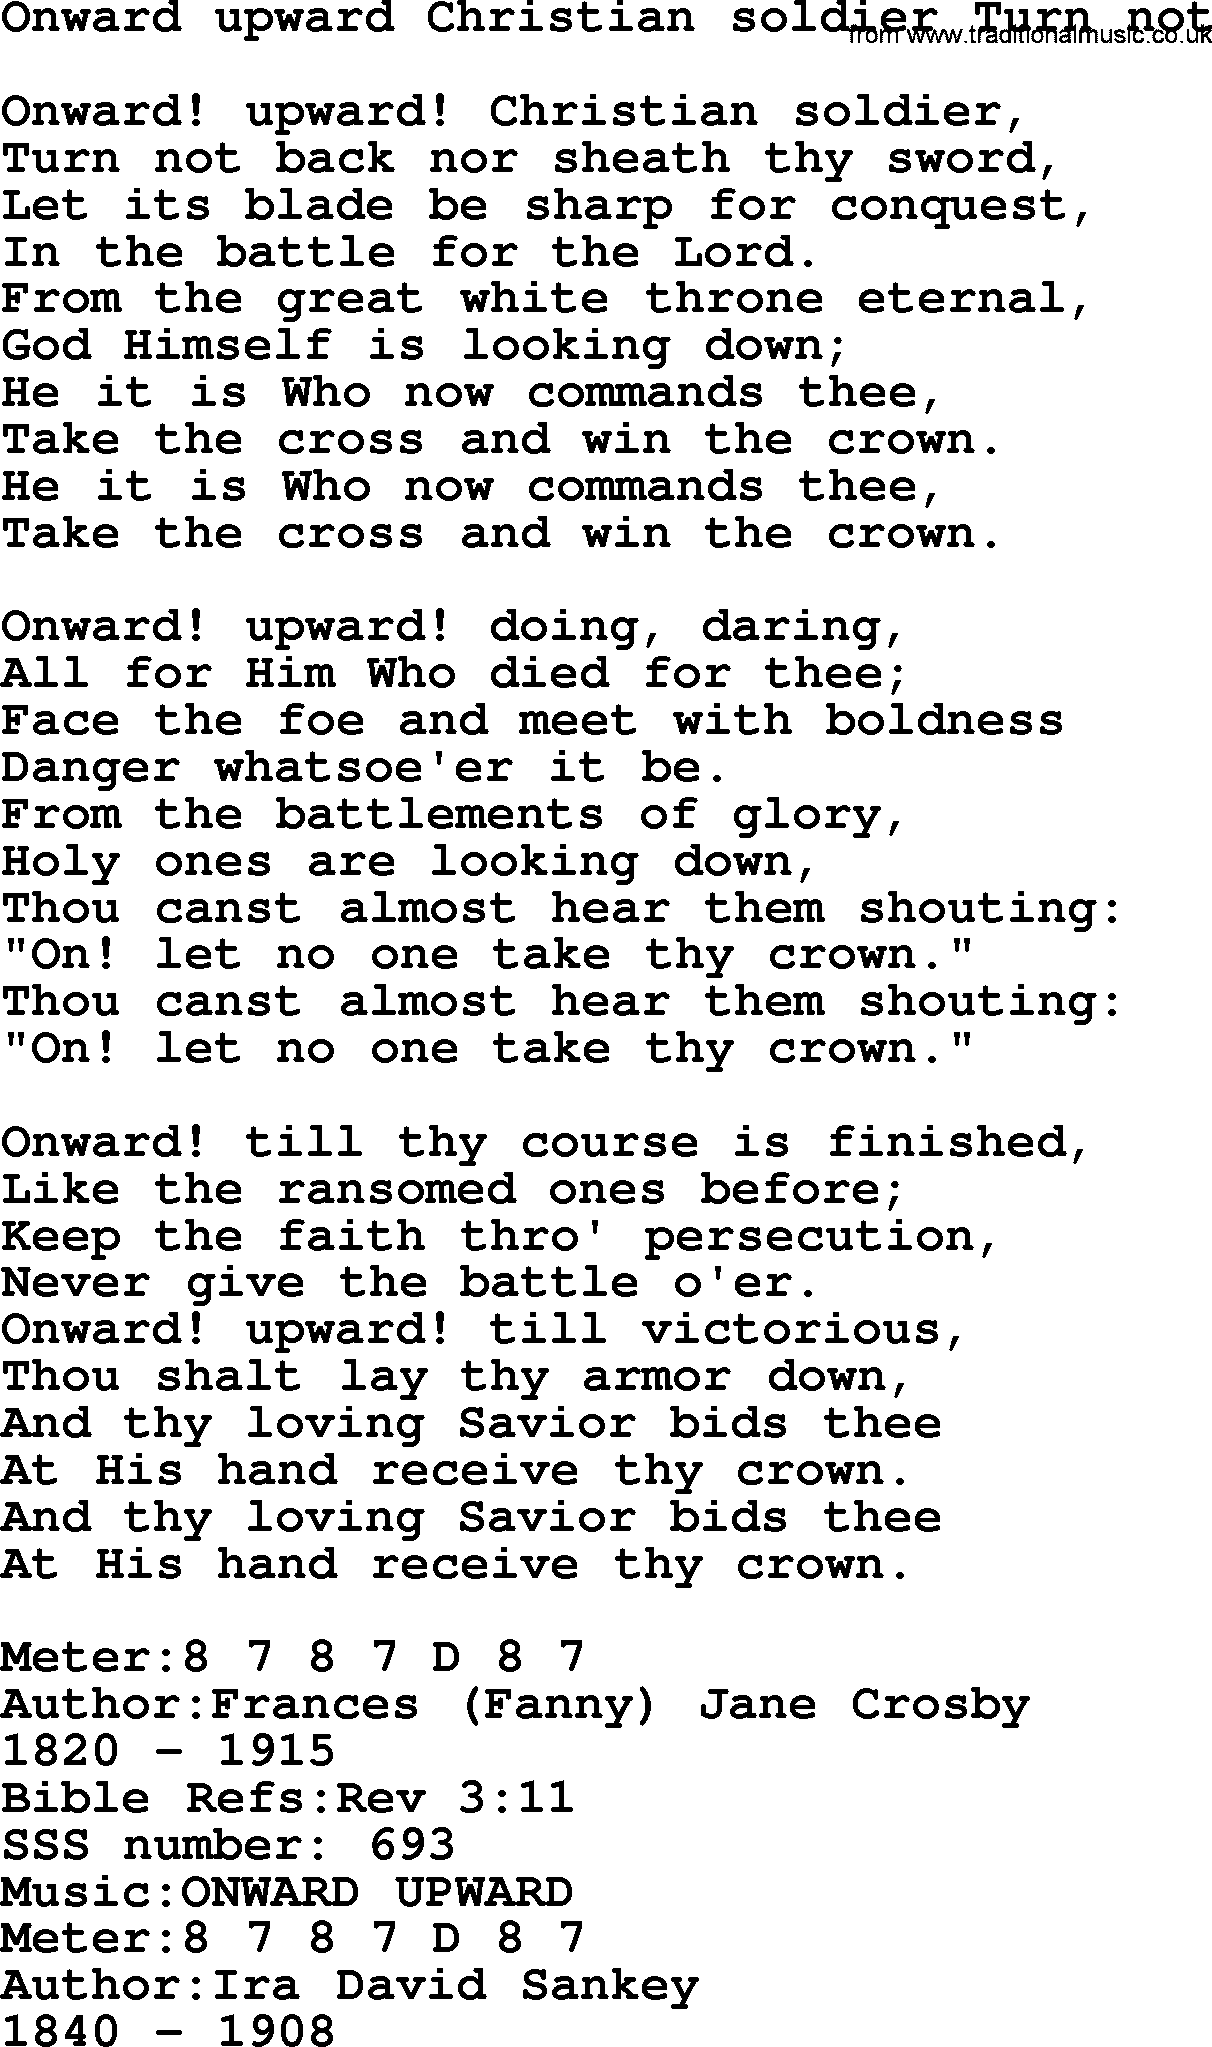 Sacred Songs and Solos complete, 1200 Hymns, title: Onward Upward Christian Soldier Turn Not, lyrics and PDF